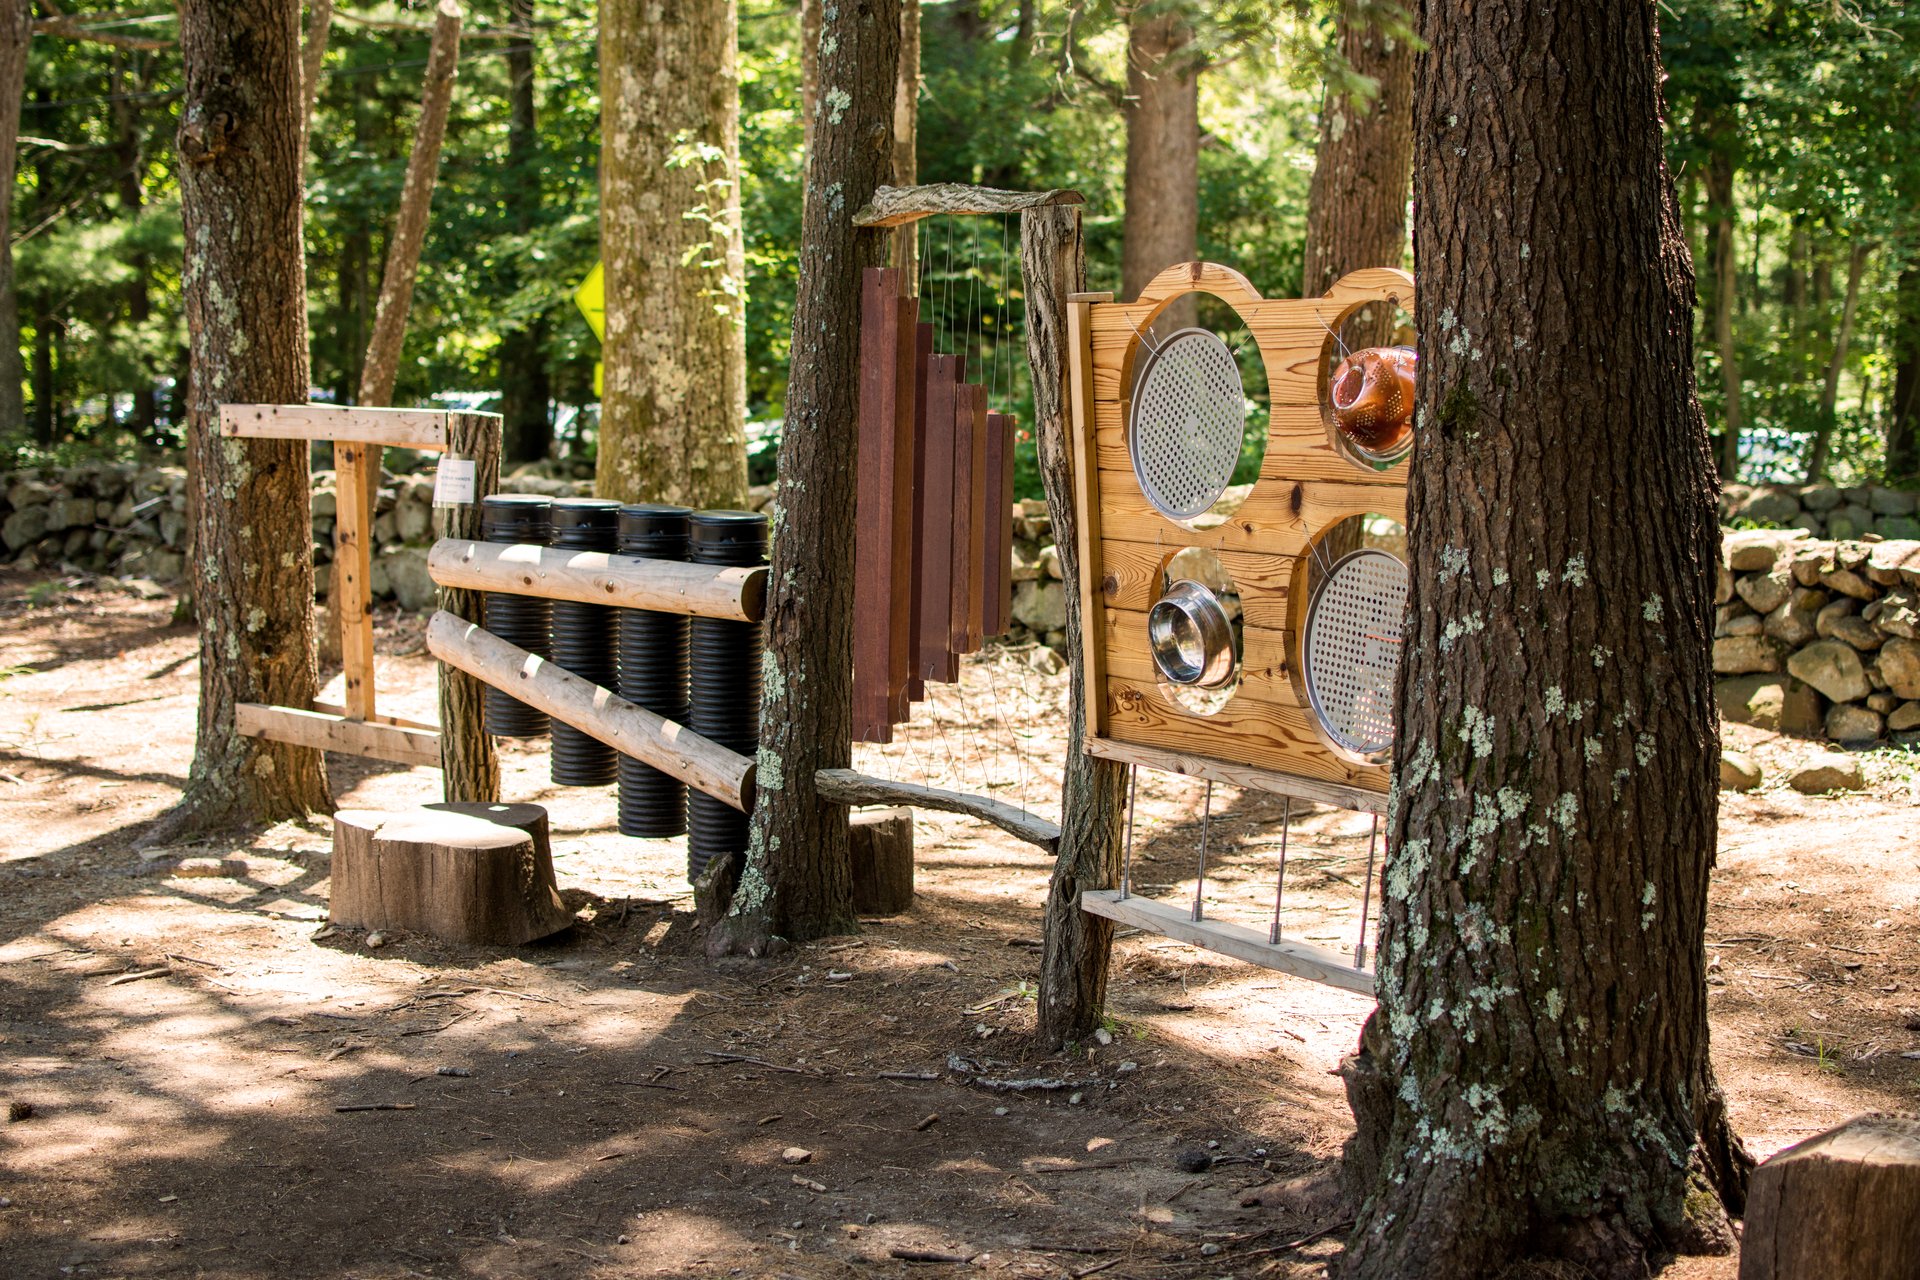 Nature play area for children with wooden puzzles and climbing materials.